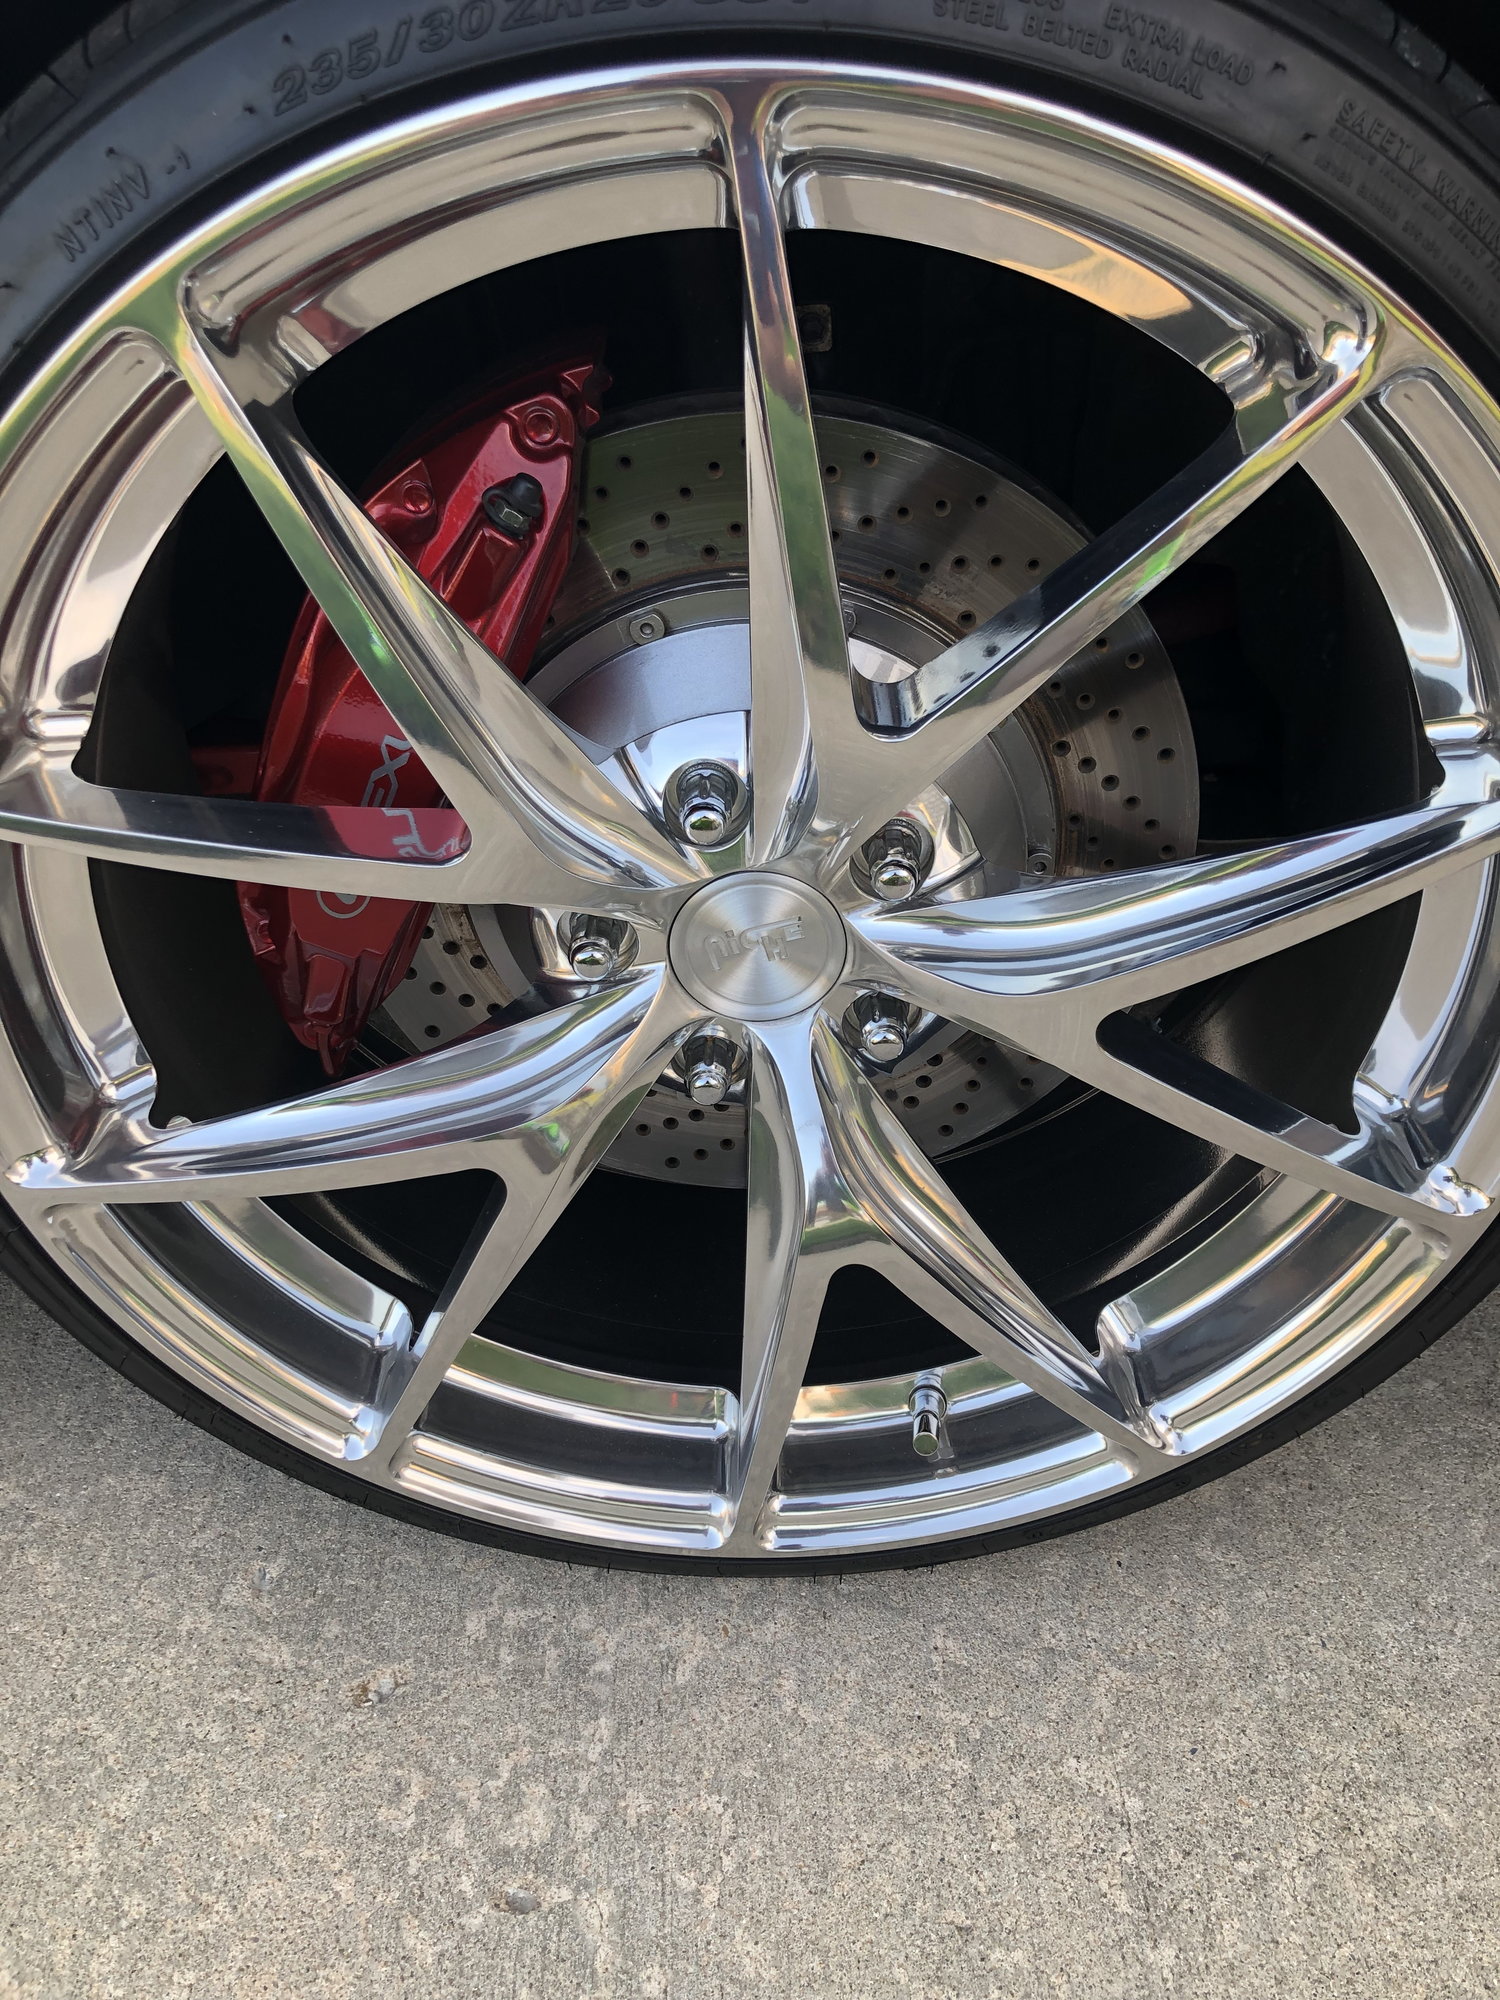 Wheels and Tires/Axles - FS: Niche custom forged wheels - Used - 2001 to 2005 Lexus IS300 - 2000 to 2019 Any Make All Models - Kokomo, IN 46902, United States